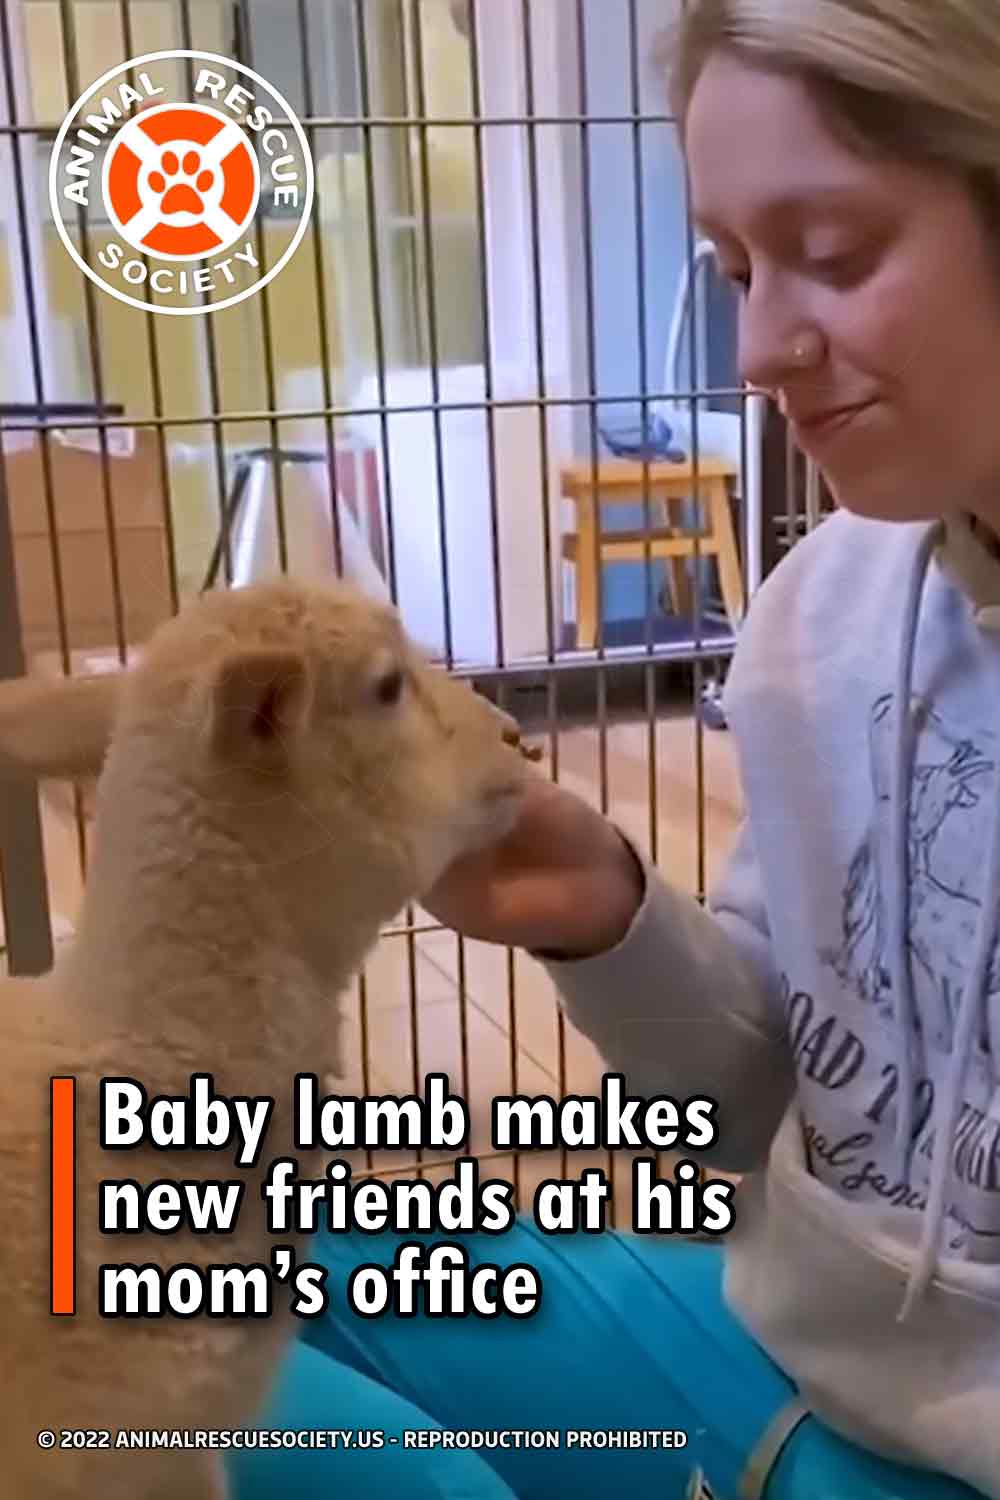 Baby lamb makes new friends at his mom’s office